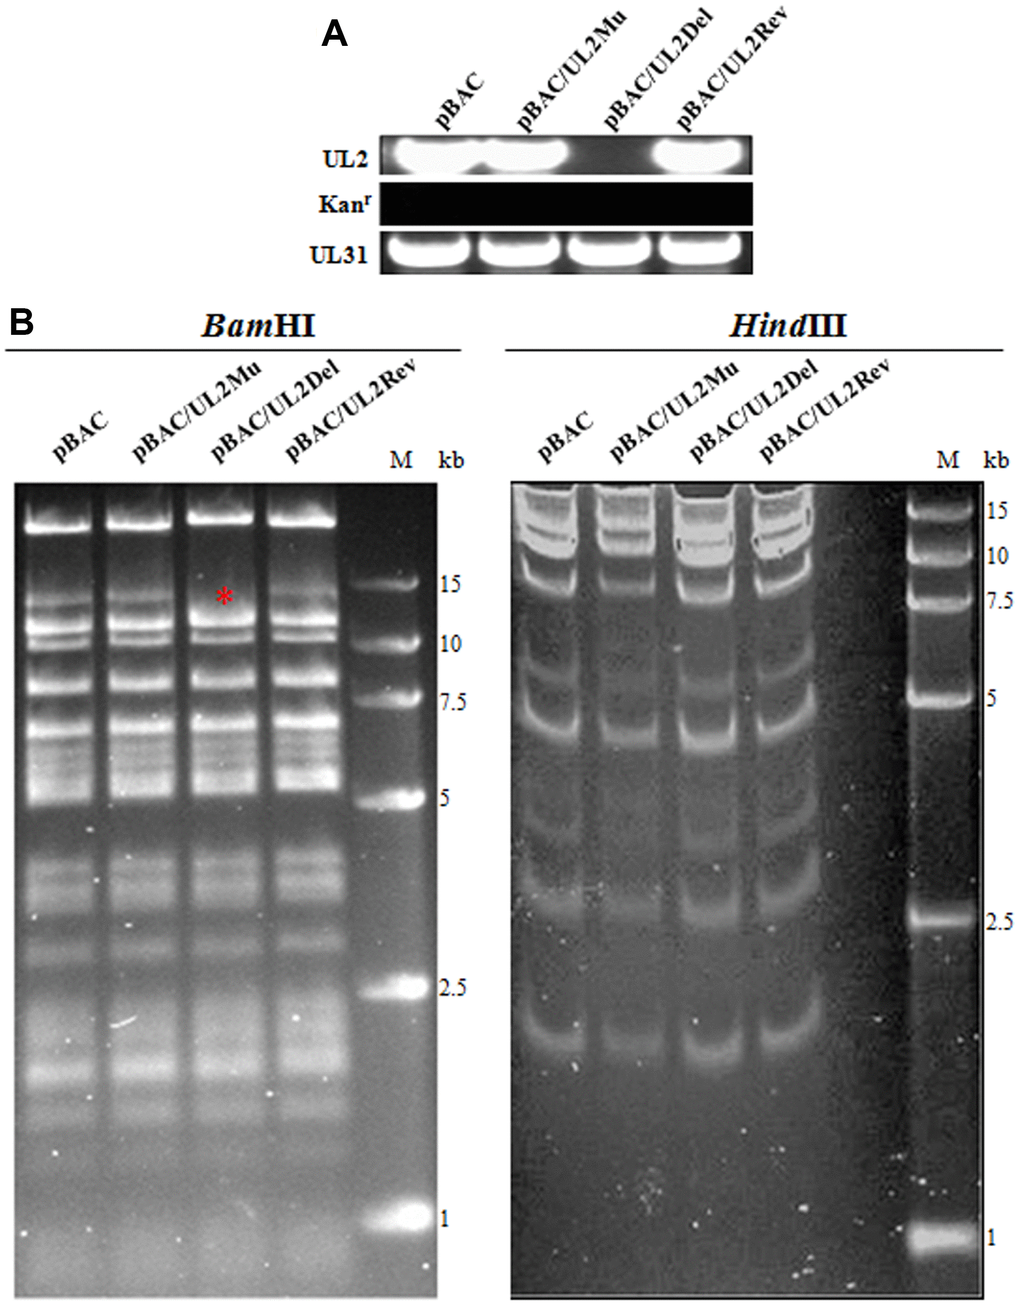 BACs construction of UL2-related recombinant HSV-1. (A) PCR analysis of the constructed recombinant BACs. The UL2, UL31 and Kanr genes were amplified from WT pBAC (lane 1), pBAC/UL2Mu (lane 2), pBAC/UL2Del (lane 3) and pBAC/UL2Rev (lane 4), respectively. (B) Gel electrophoresis (0.8%) of WT pBAC (lane 1) and recombinant BACs pBAC/UL2Mu (lane 2), pBAC/UL2Del (lane 3) and pBAC/UL2Rev (lane 4) analyzed by BamHI and HindIII restriction digestion, respectively. The red asterisk indicates the specific band that was disappeared only in pBAC/UL2Del genome when all the BACs were treated with BamHI digestion. Marker sizes in kb are indicated on the right side of the gels.